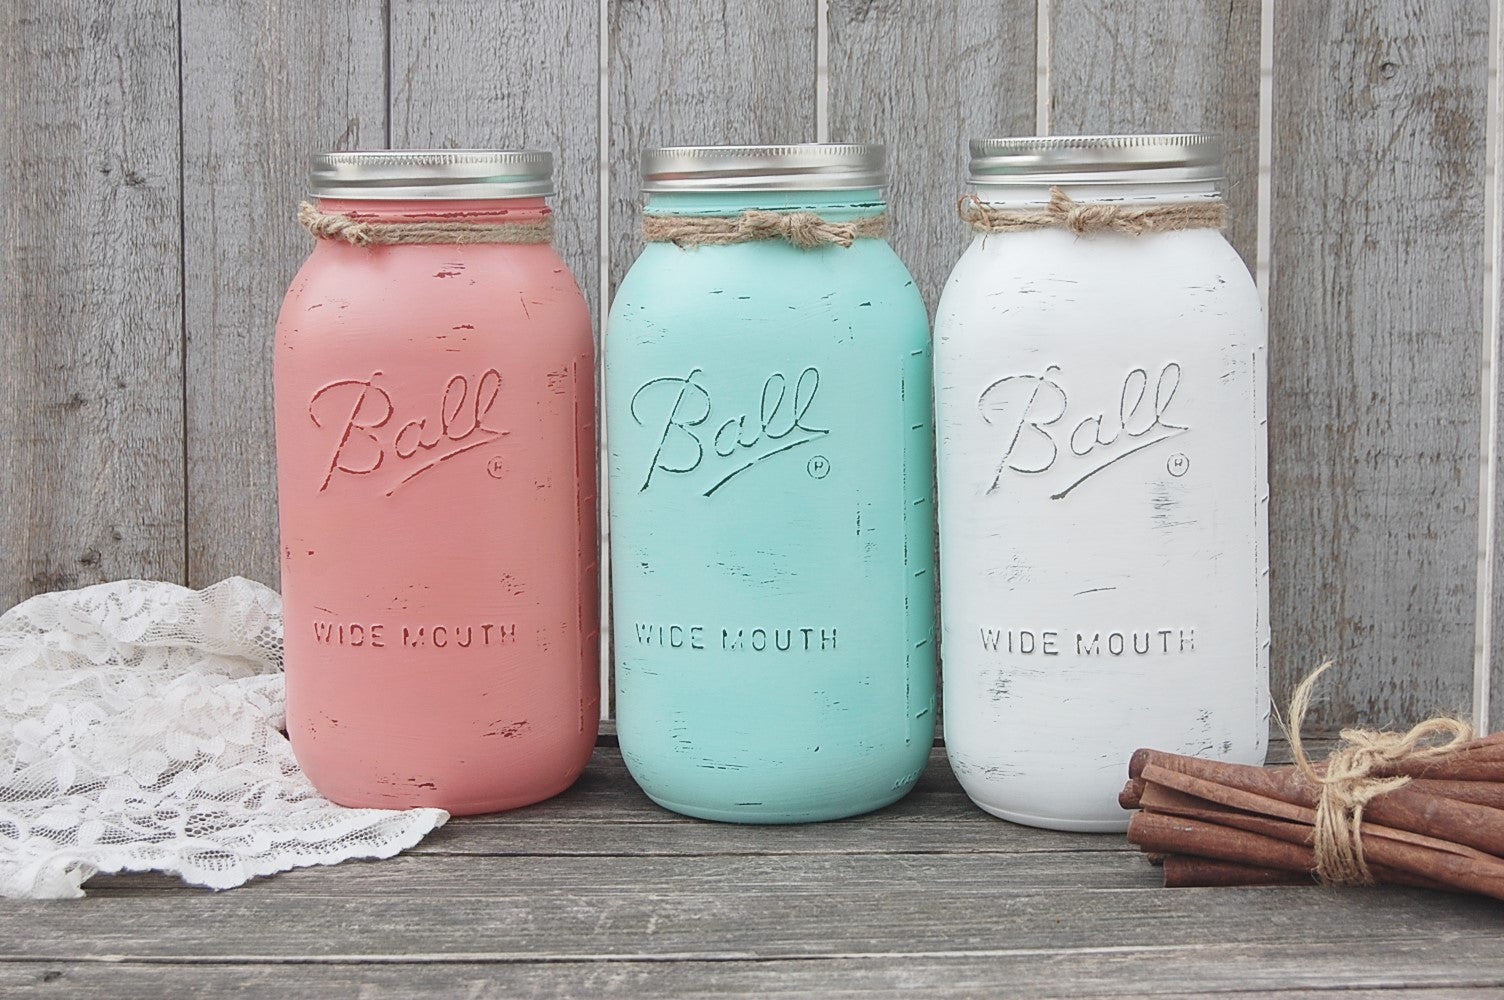 Mason jar canisters - The Vintage Artistry